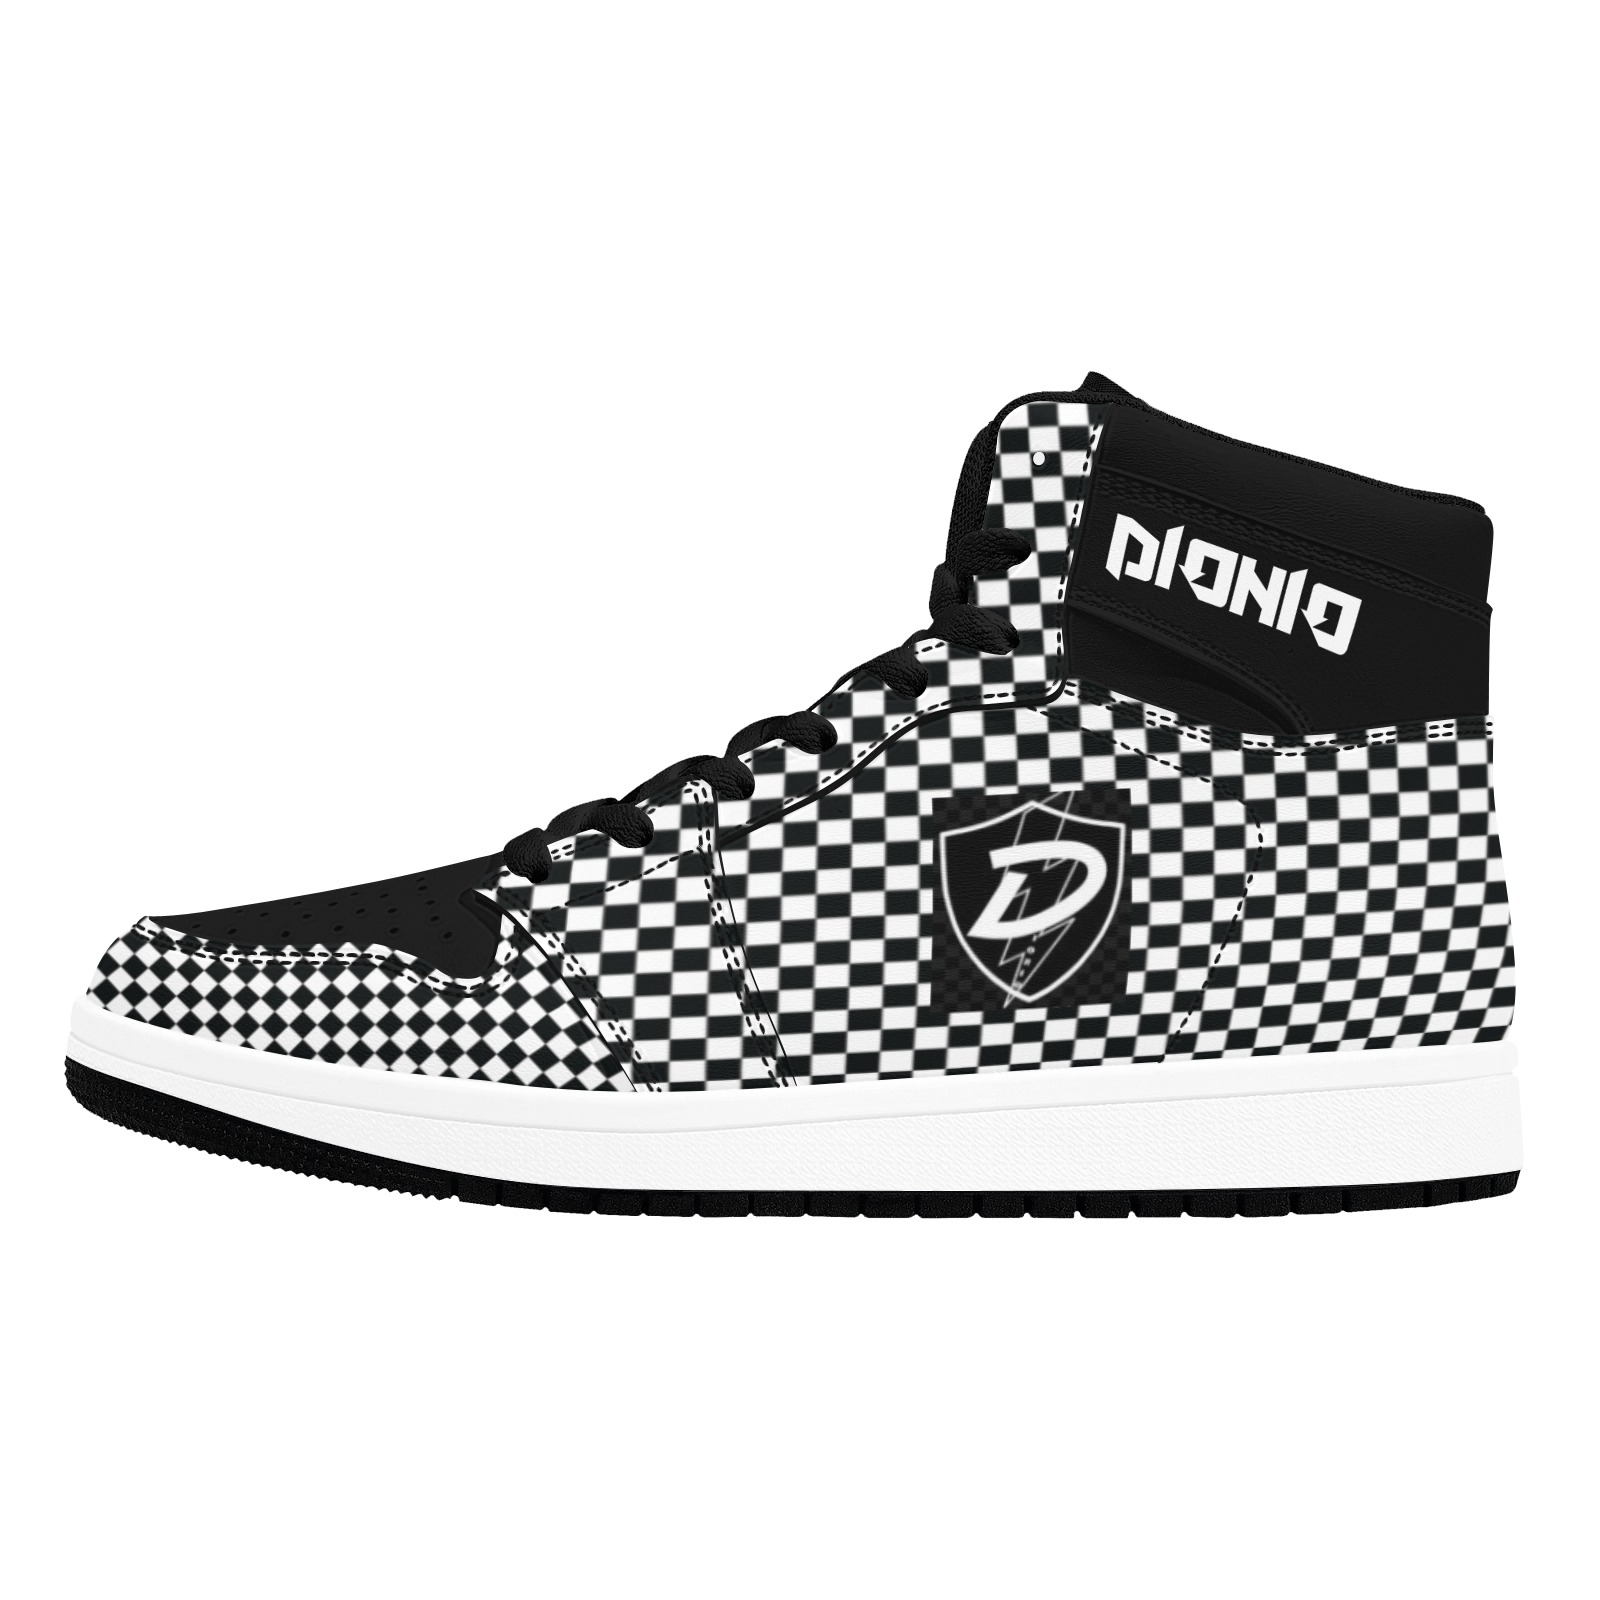 DIONIO - Armored Knight Sneakers Unisex High Top Sneakers (Model 20042)